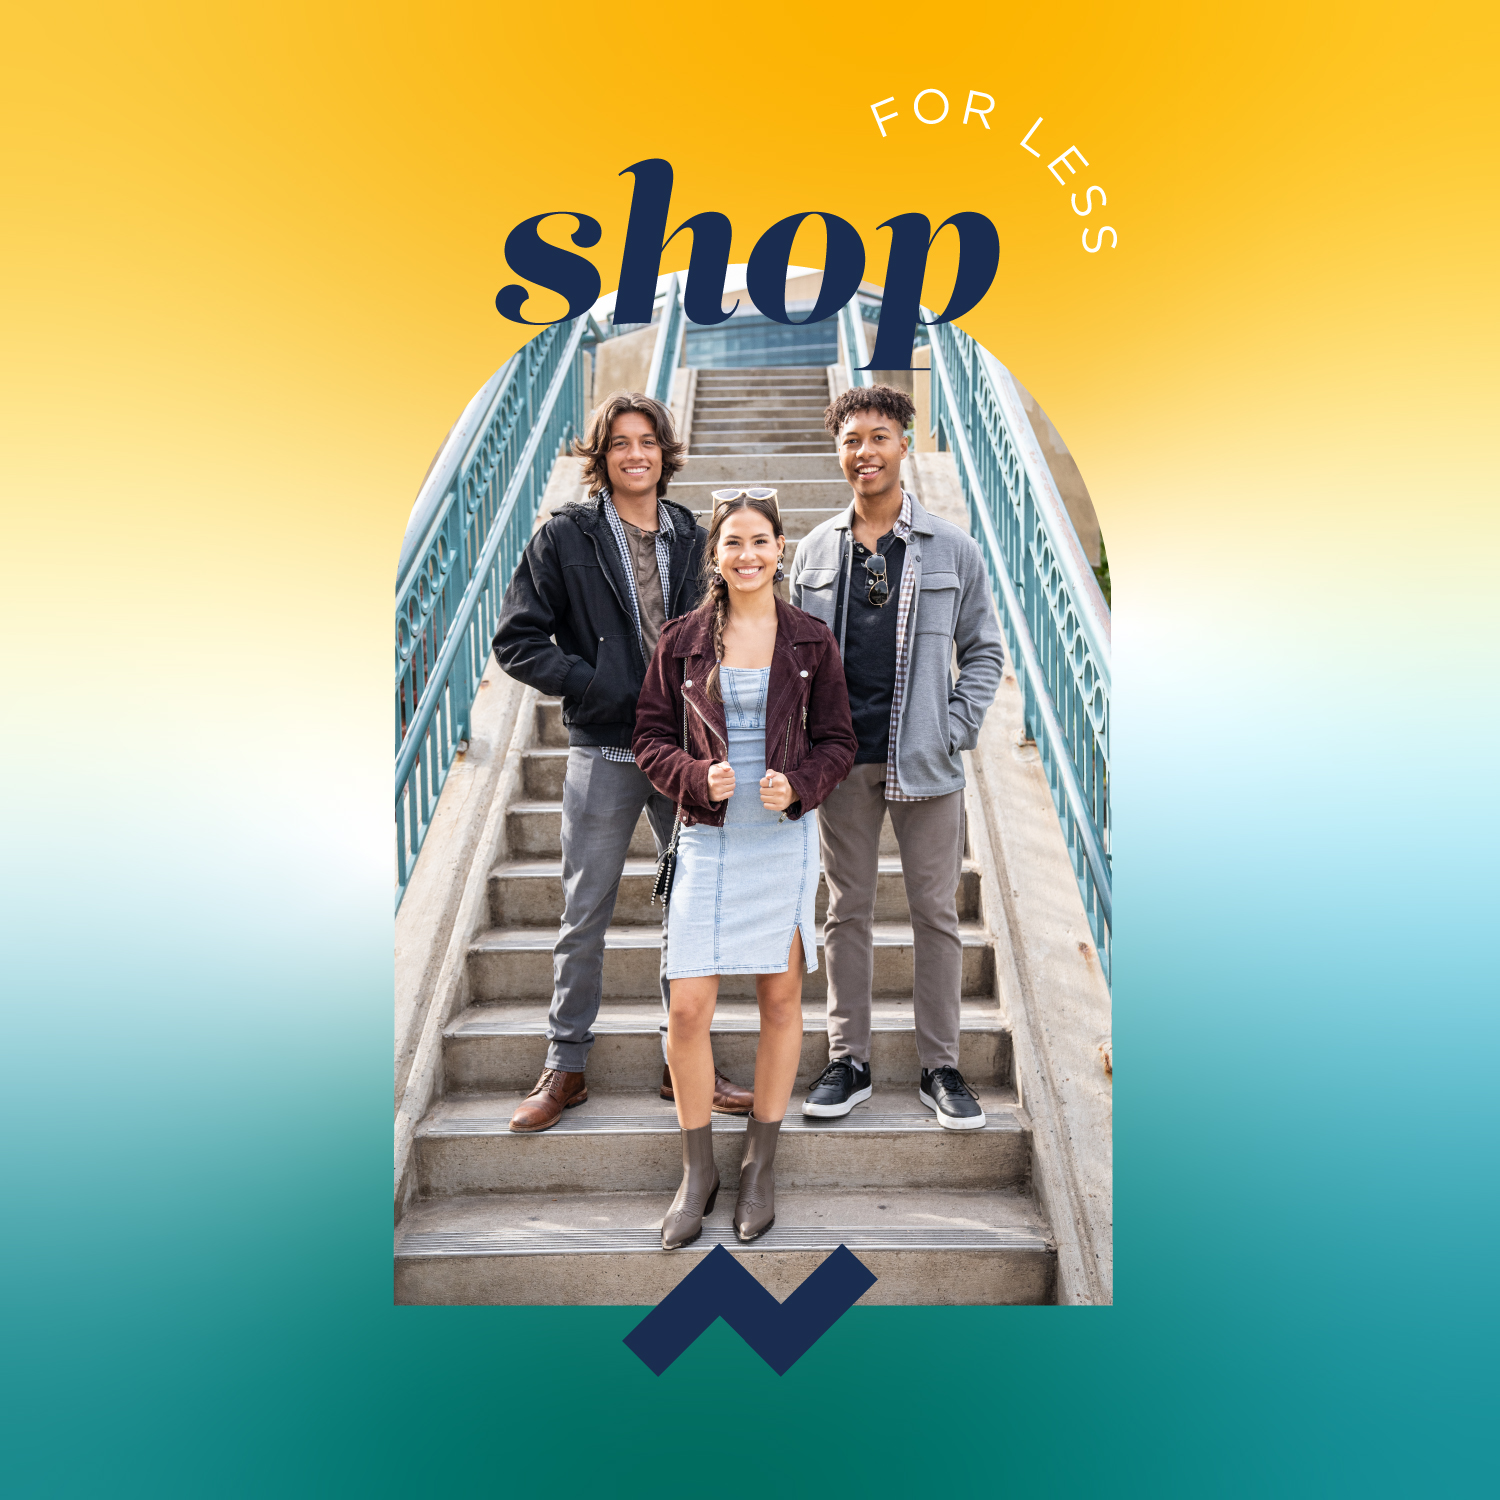 Yellow and teal background with an image of 3 teens in the centre, posing and smiling. The words 